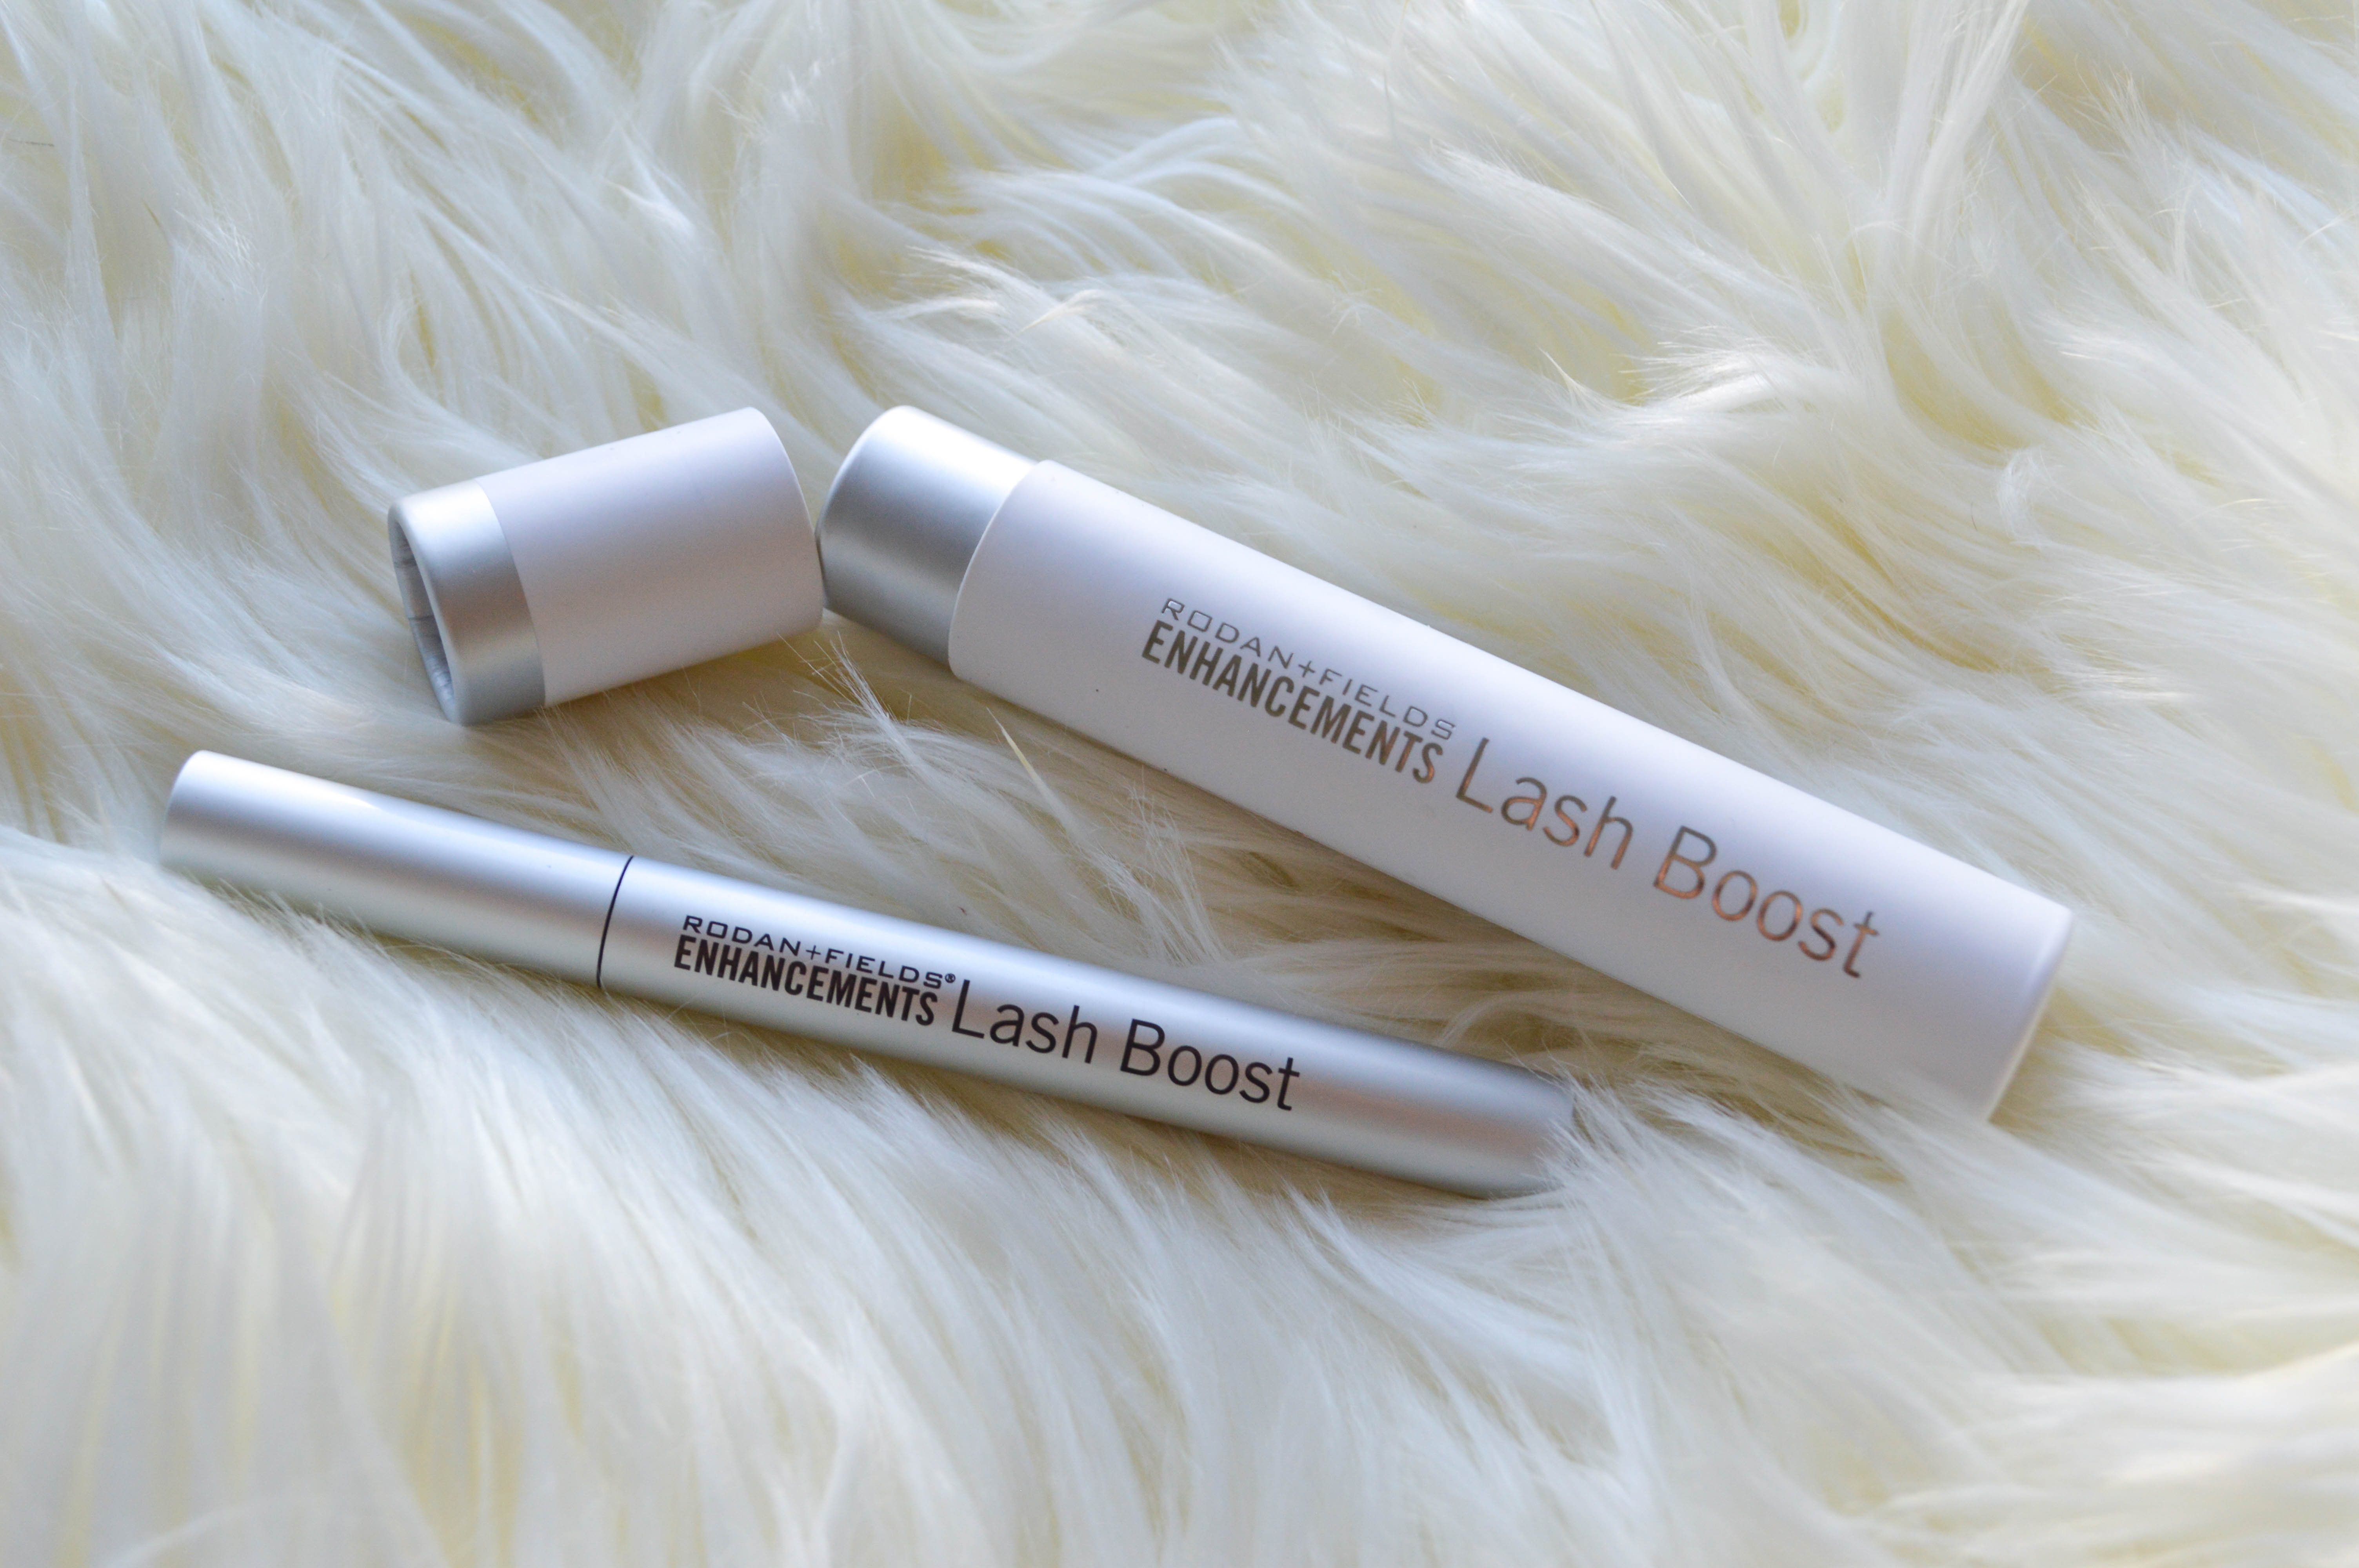 Rodan & Fields Lash Boost review featured by popular Denver life and style blogger, All Things Lovely